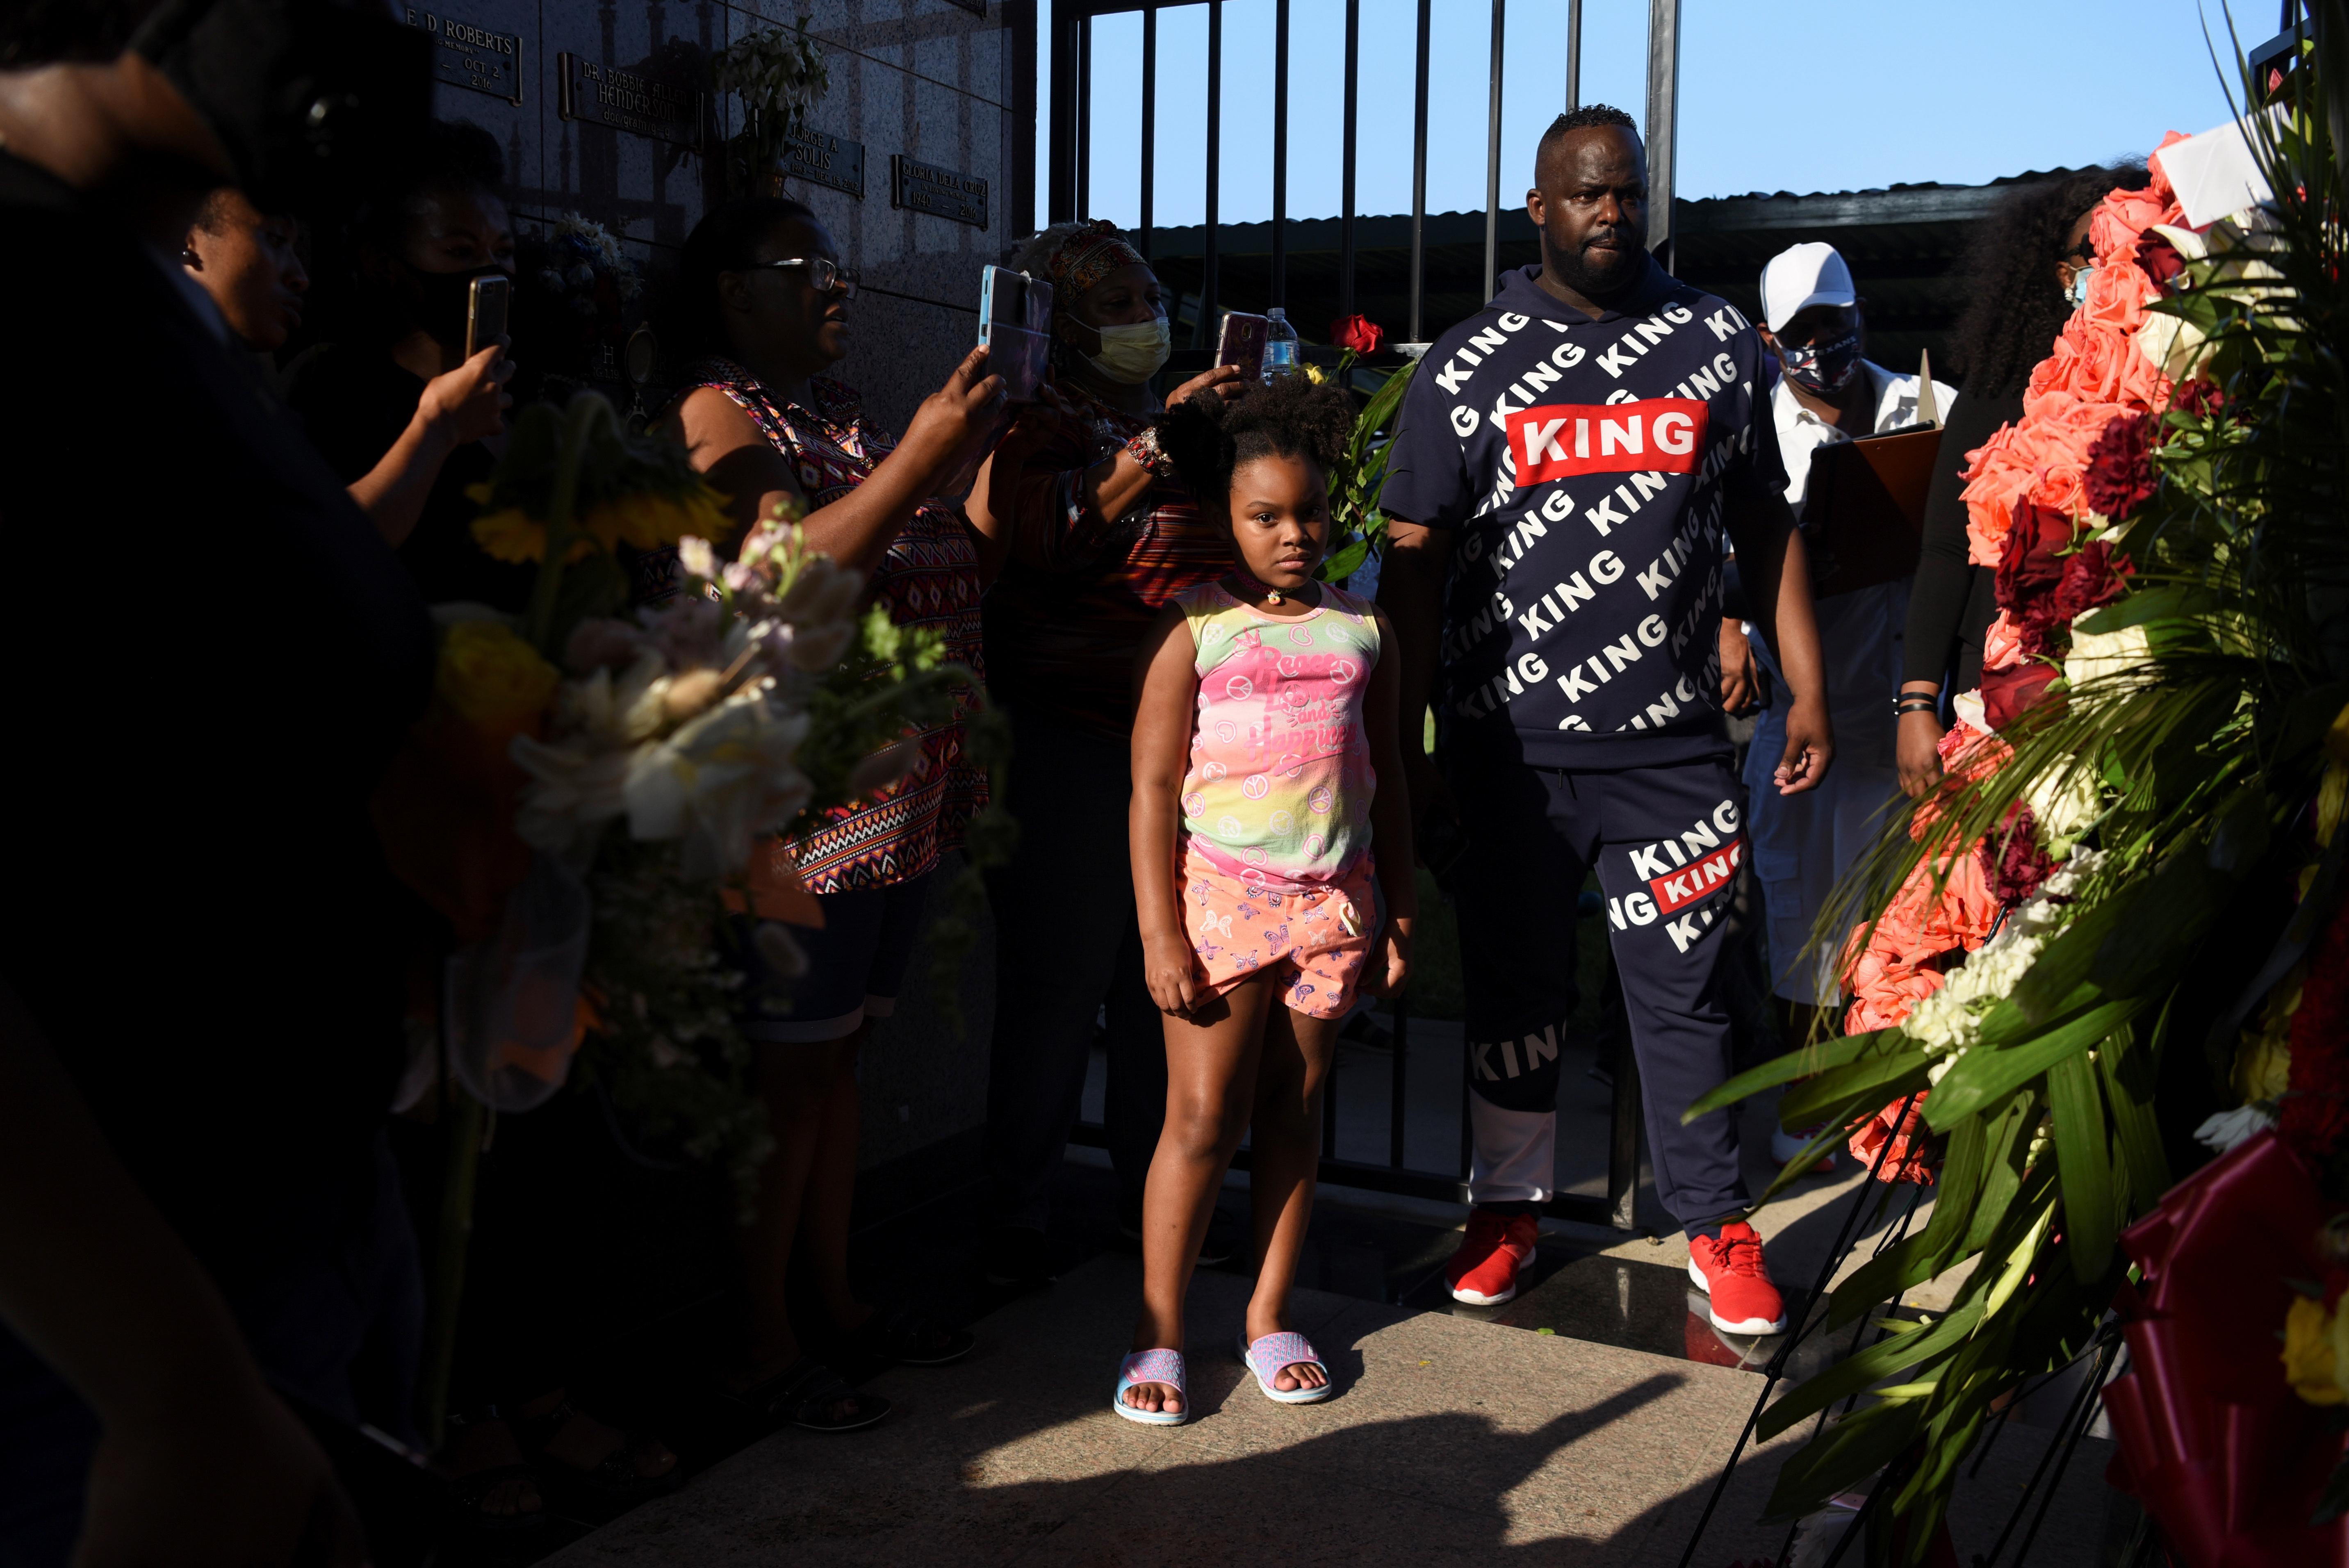 People visit the gravesite of George Floyd, whose death in Minneapolis police custody has sparked nationwide protests against racial inequality, in Pearland, Texas, U.S., June 9, 2020. Photo: Reuters